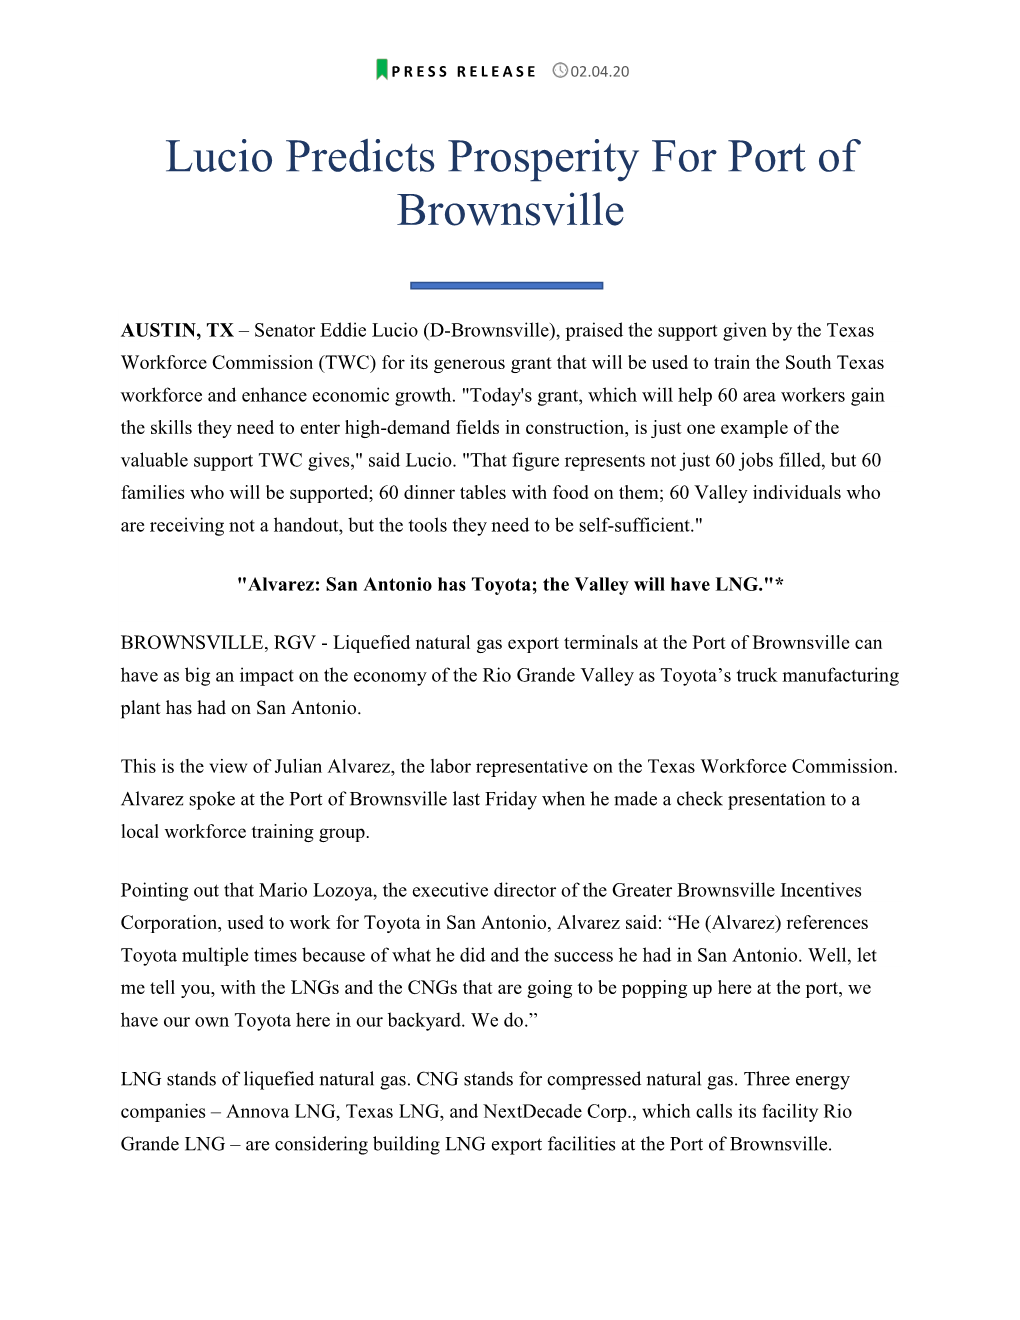 Lucio Predicts Prosperity for Port of Brownsville